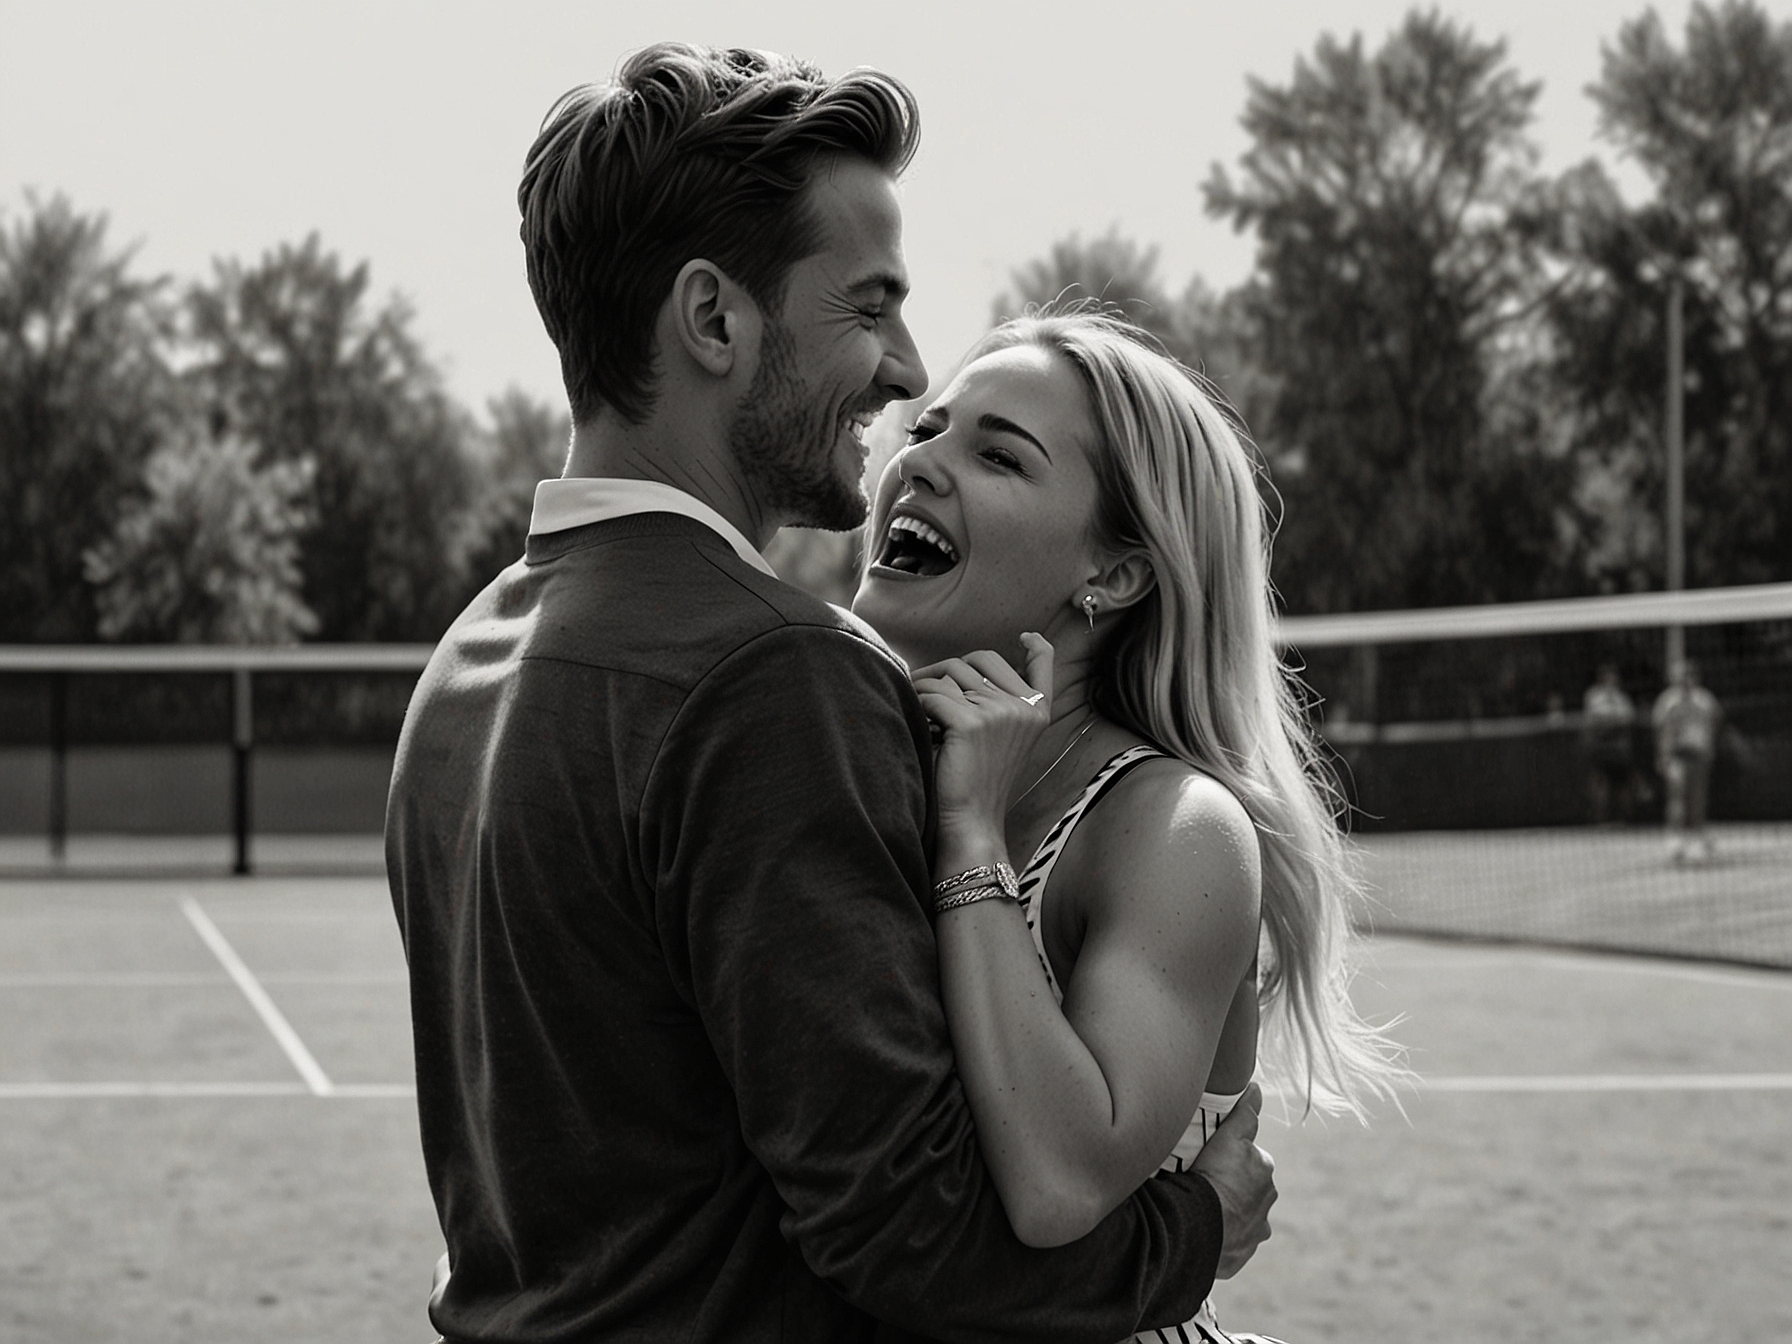 Paige Lorenze, dressed in a stylish outfit, jumps excitedly into the arms of her tennis star boyfriend Tommy Paul on the court after his significant win, capturing a moment of sheer joy.